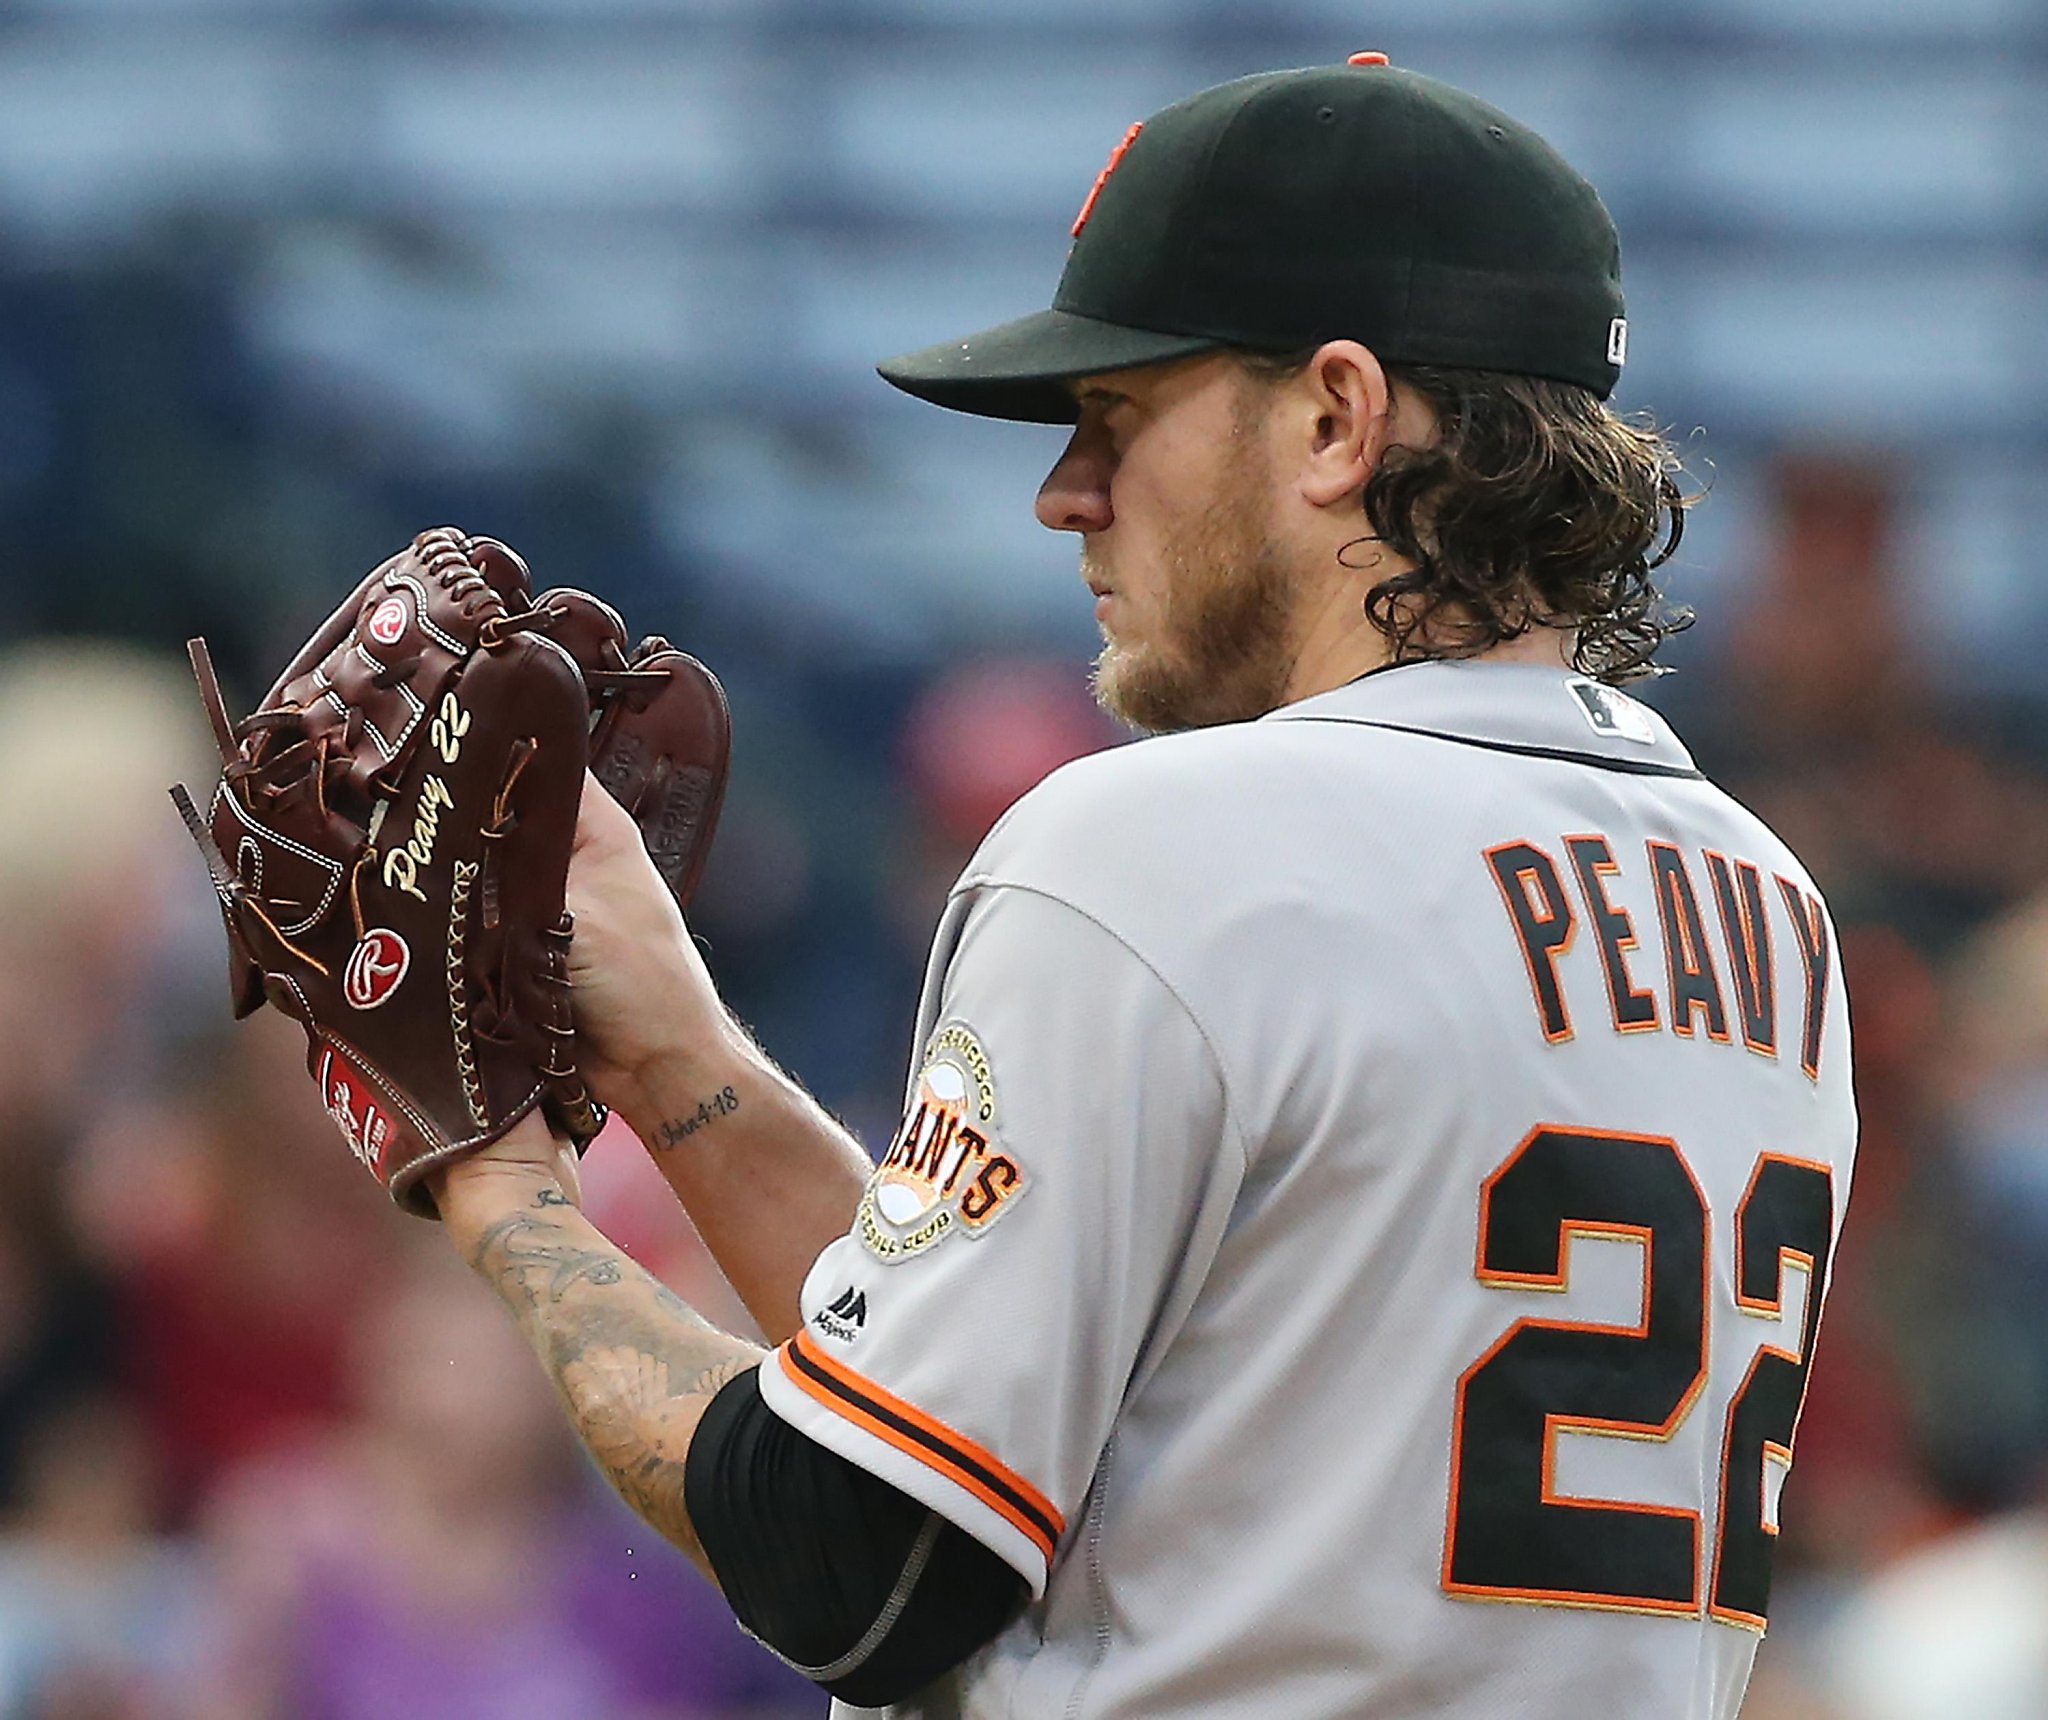 Jake Peavy's Stellar Outing For Red Sox Still Yields Disappointing Loss 